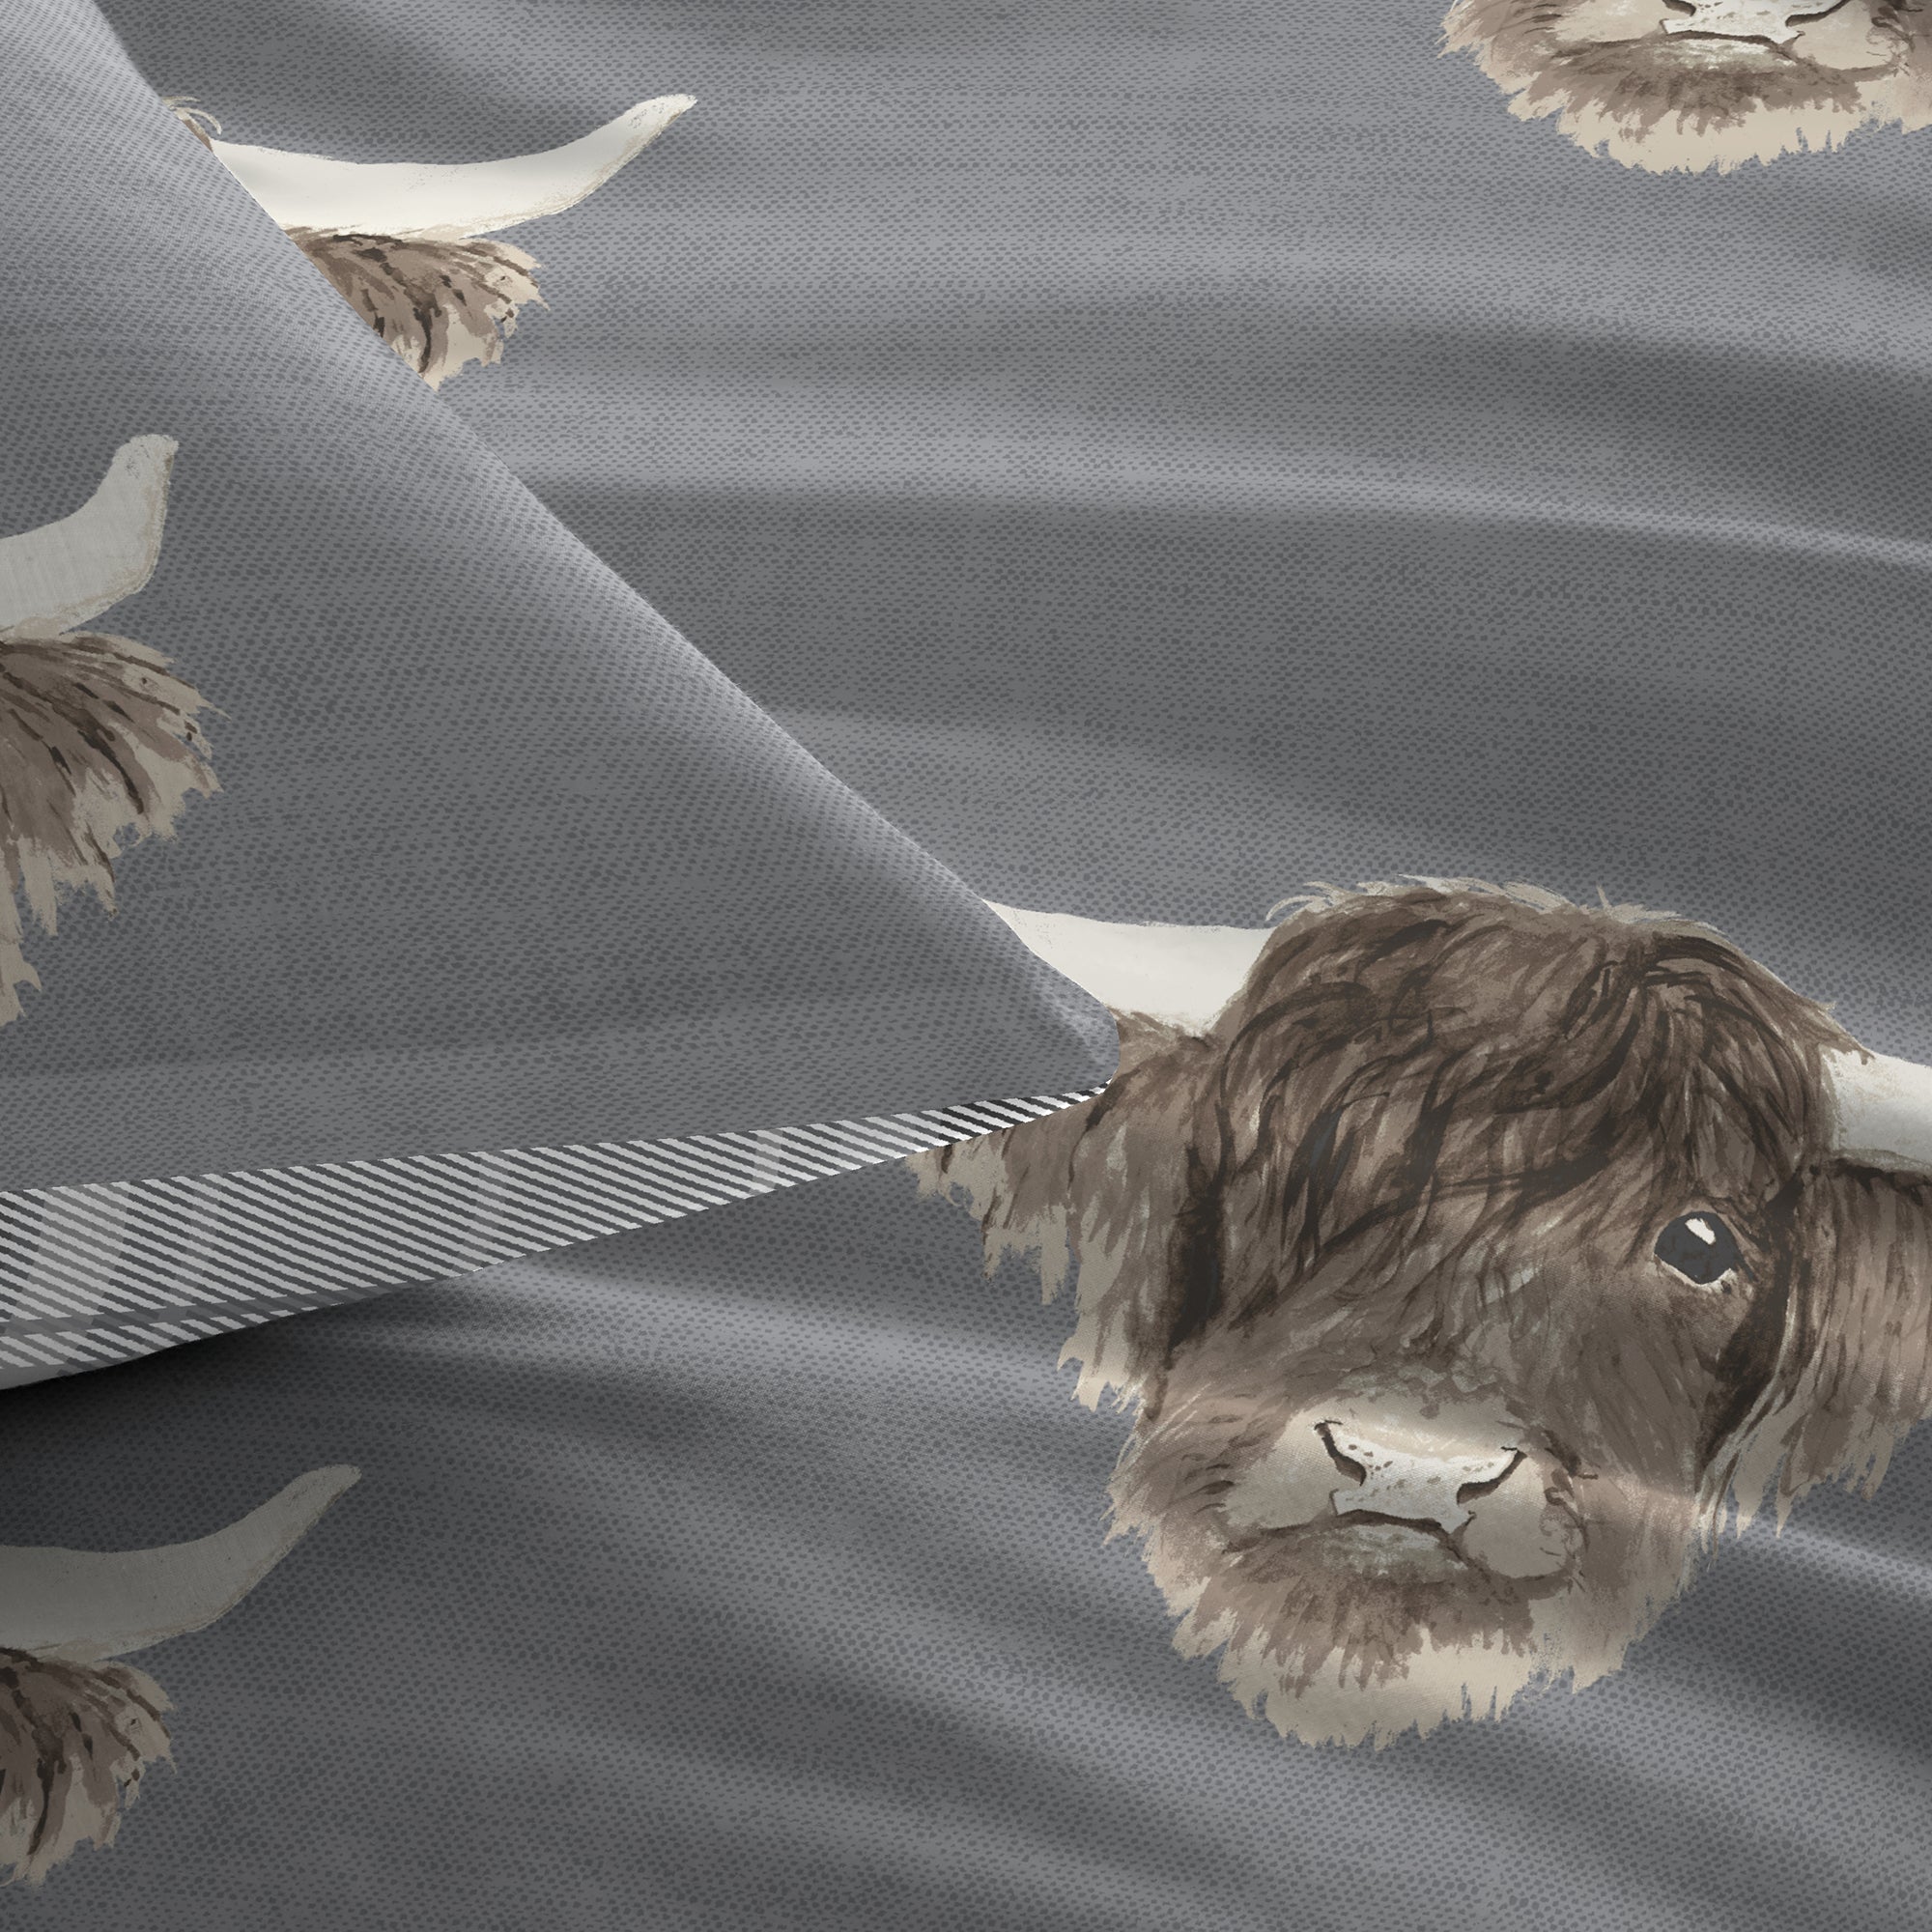 Highland Cow	- Easy Care Duvet Cover Set in Grey - By Fusion